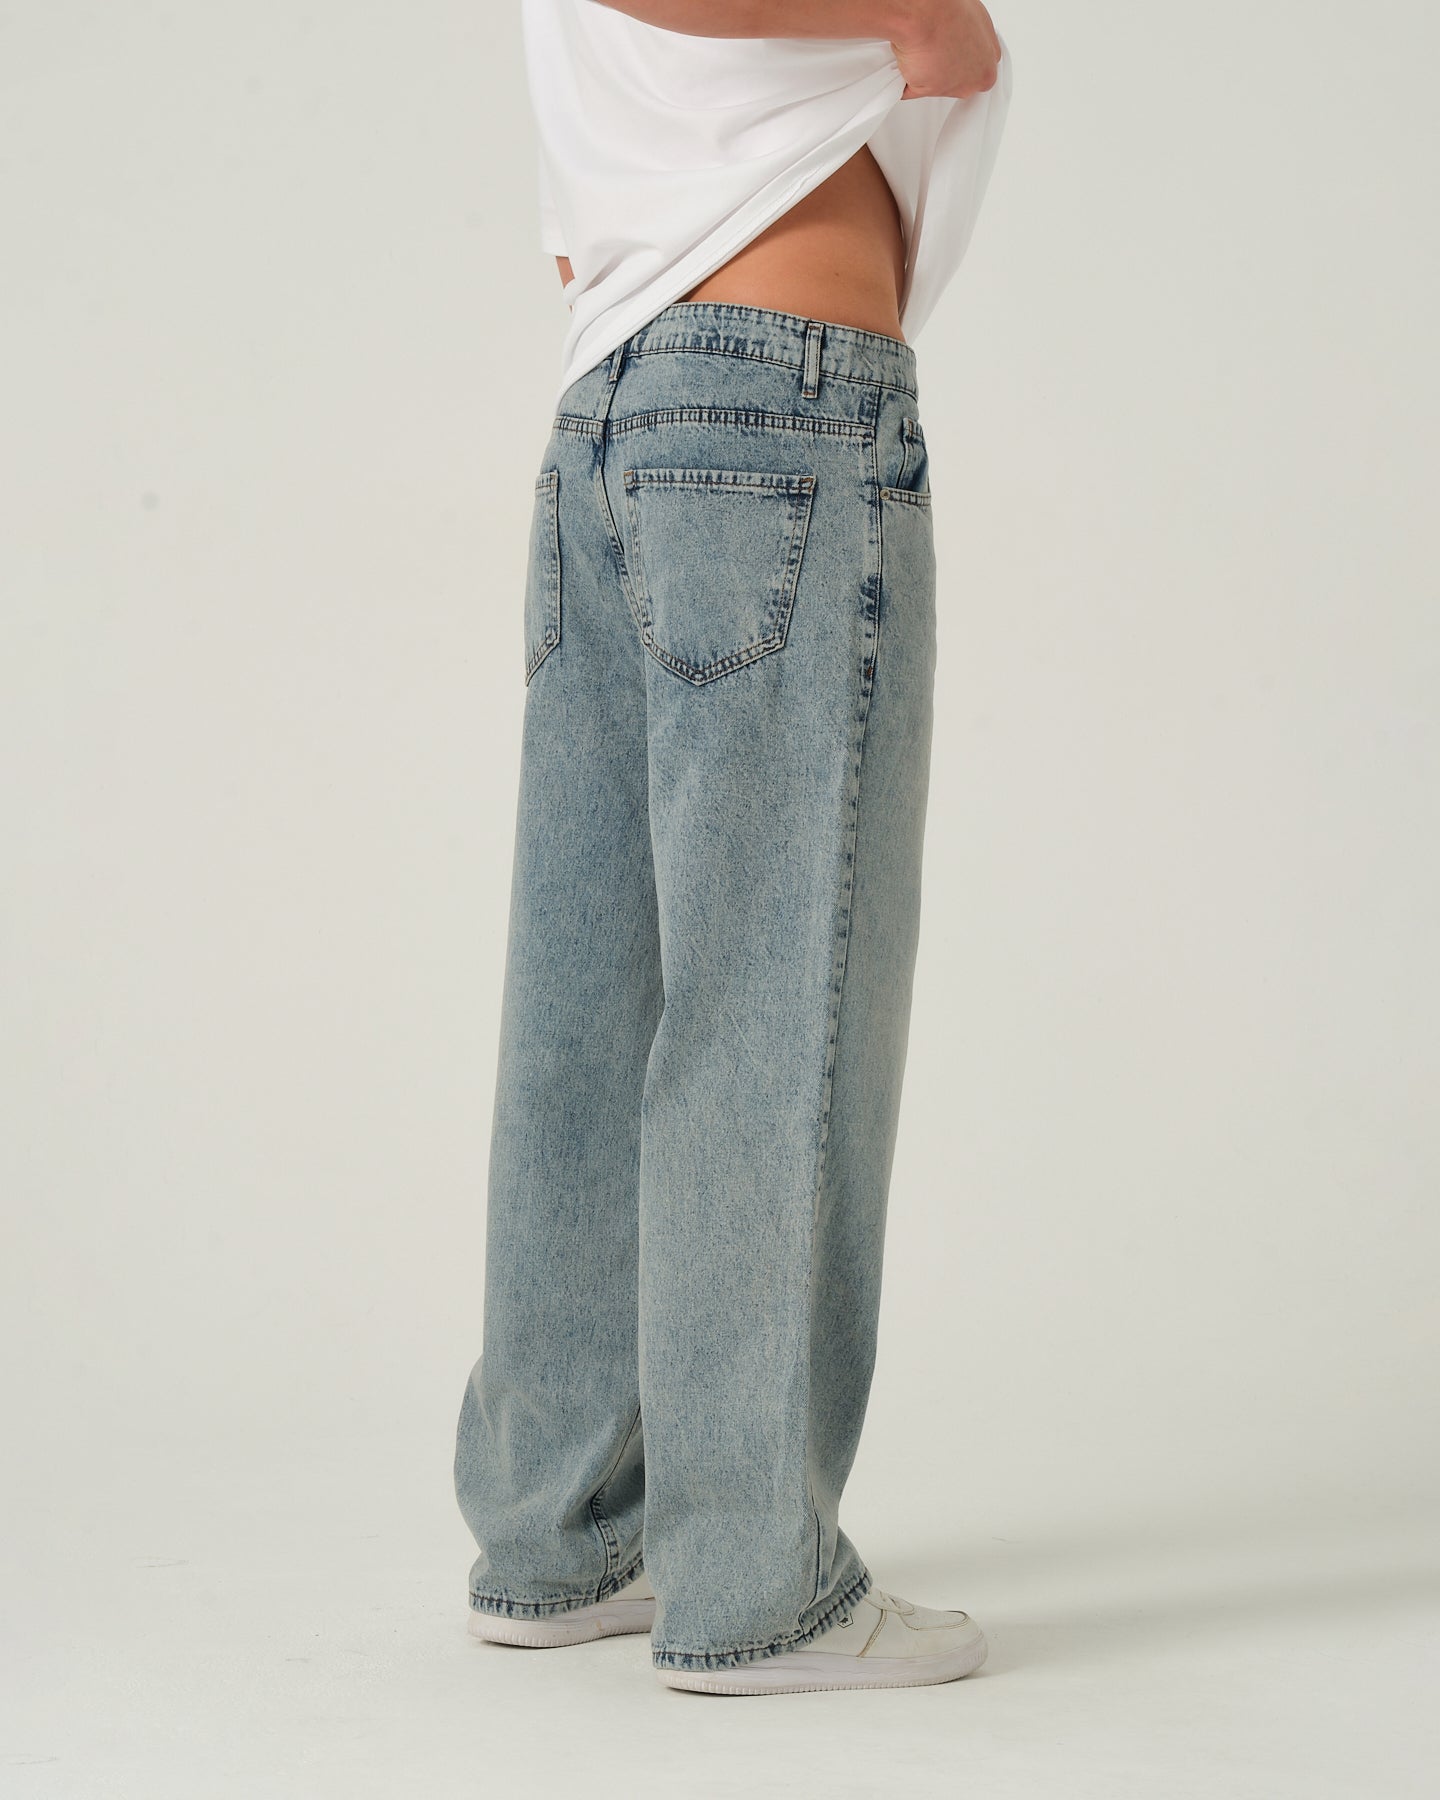 Relax Baggy Fit Jean -Super Sonic